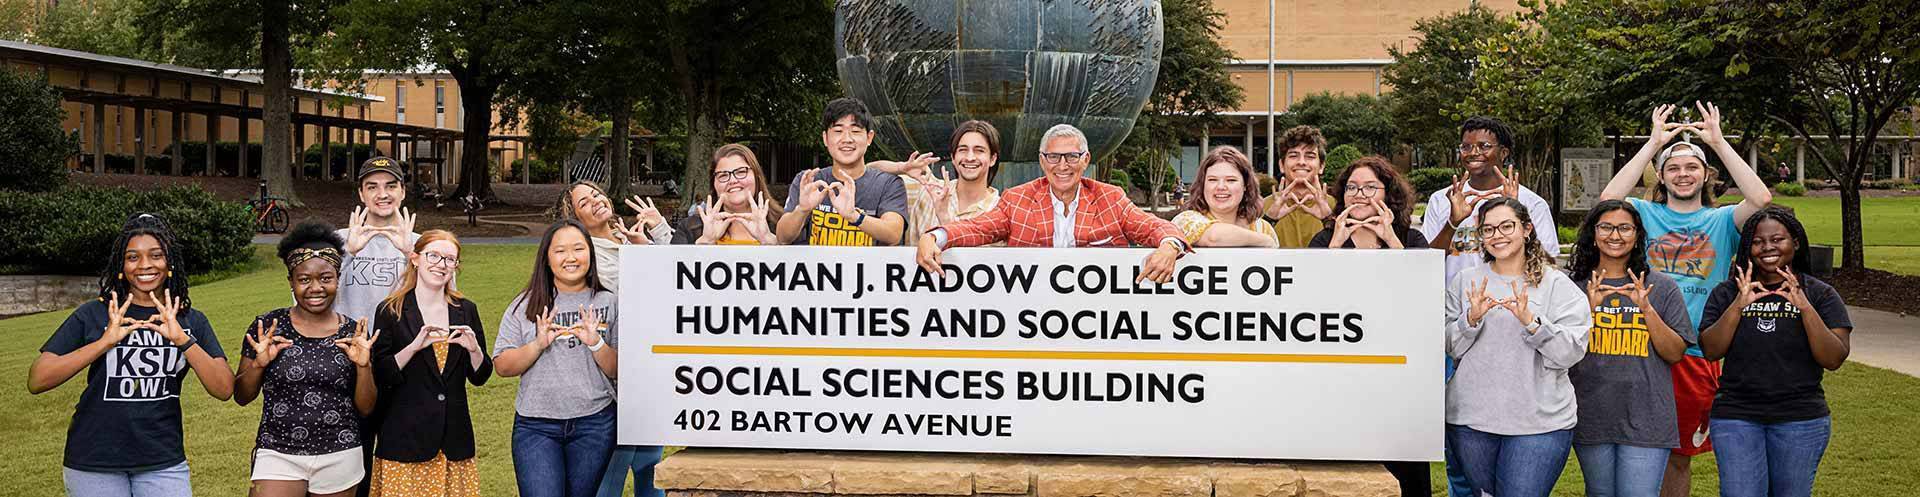 Norman J. Radow with Students around college sign